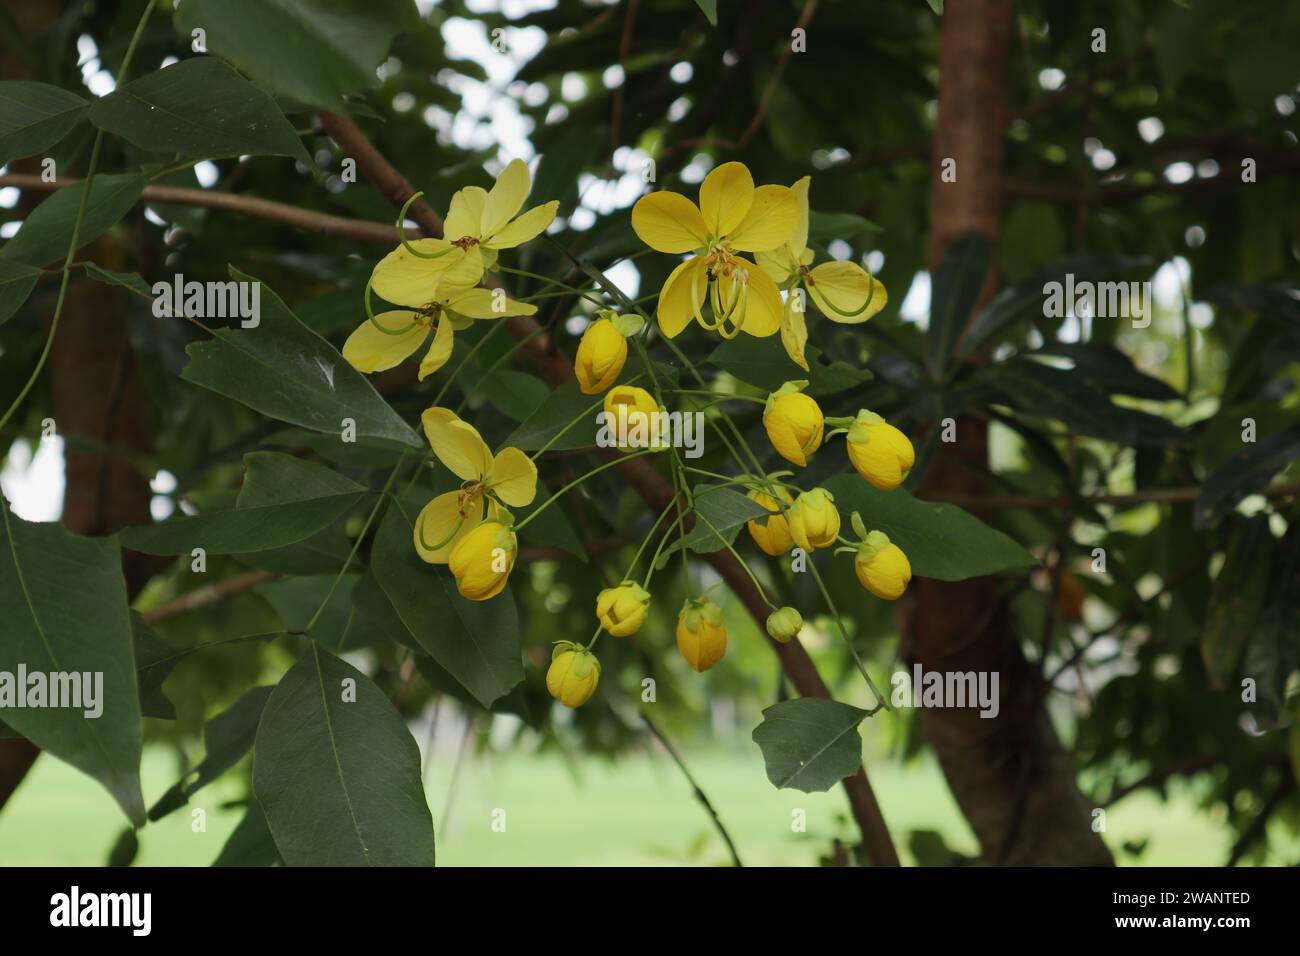 View of a yellow colored flower inflorescence of a Golden shower tree (Cassia fistula). In Sri Lanka, this tree known as the Ehela Stock Photo